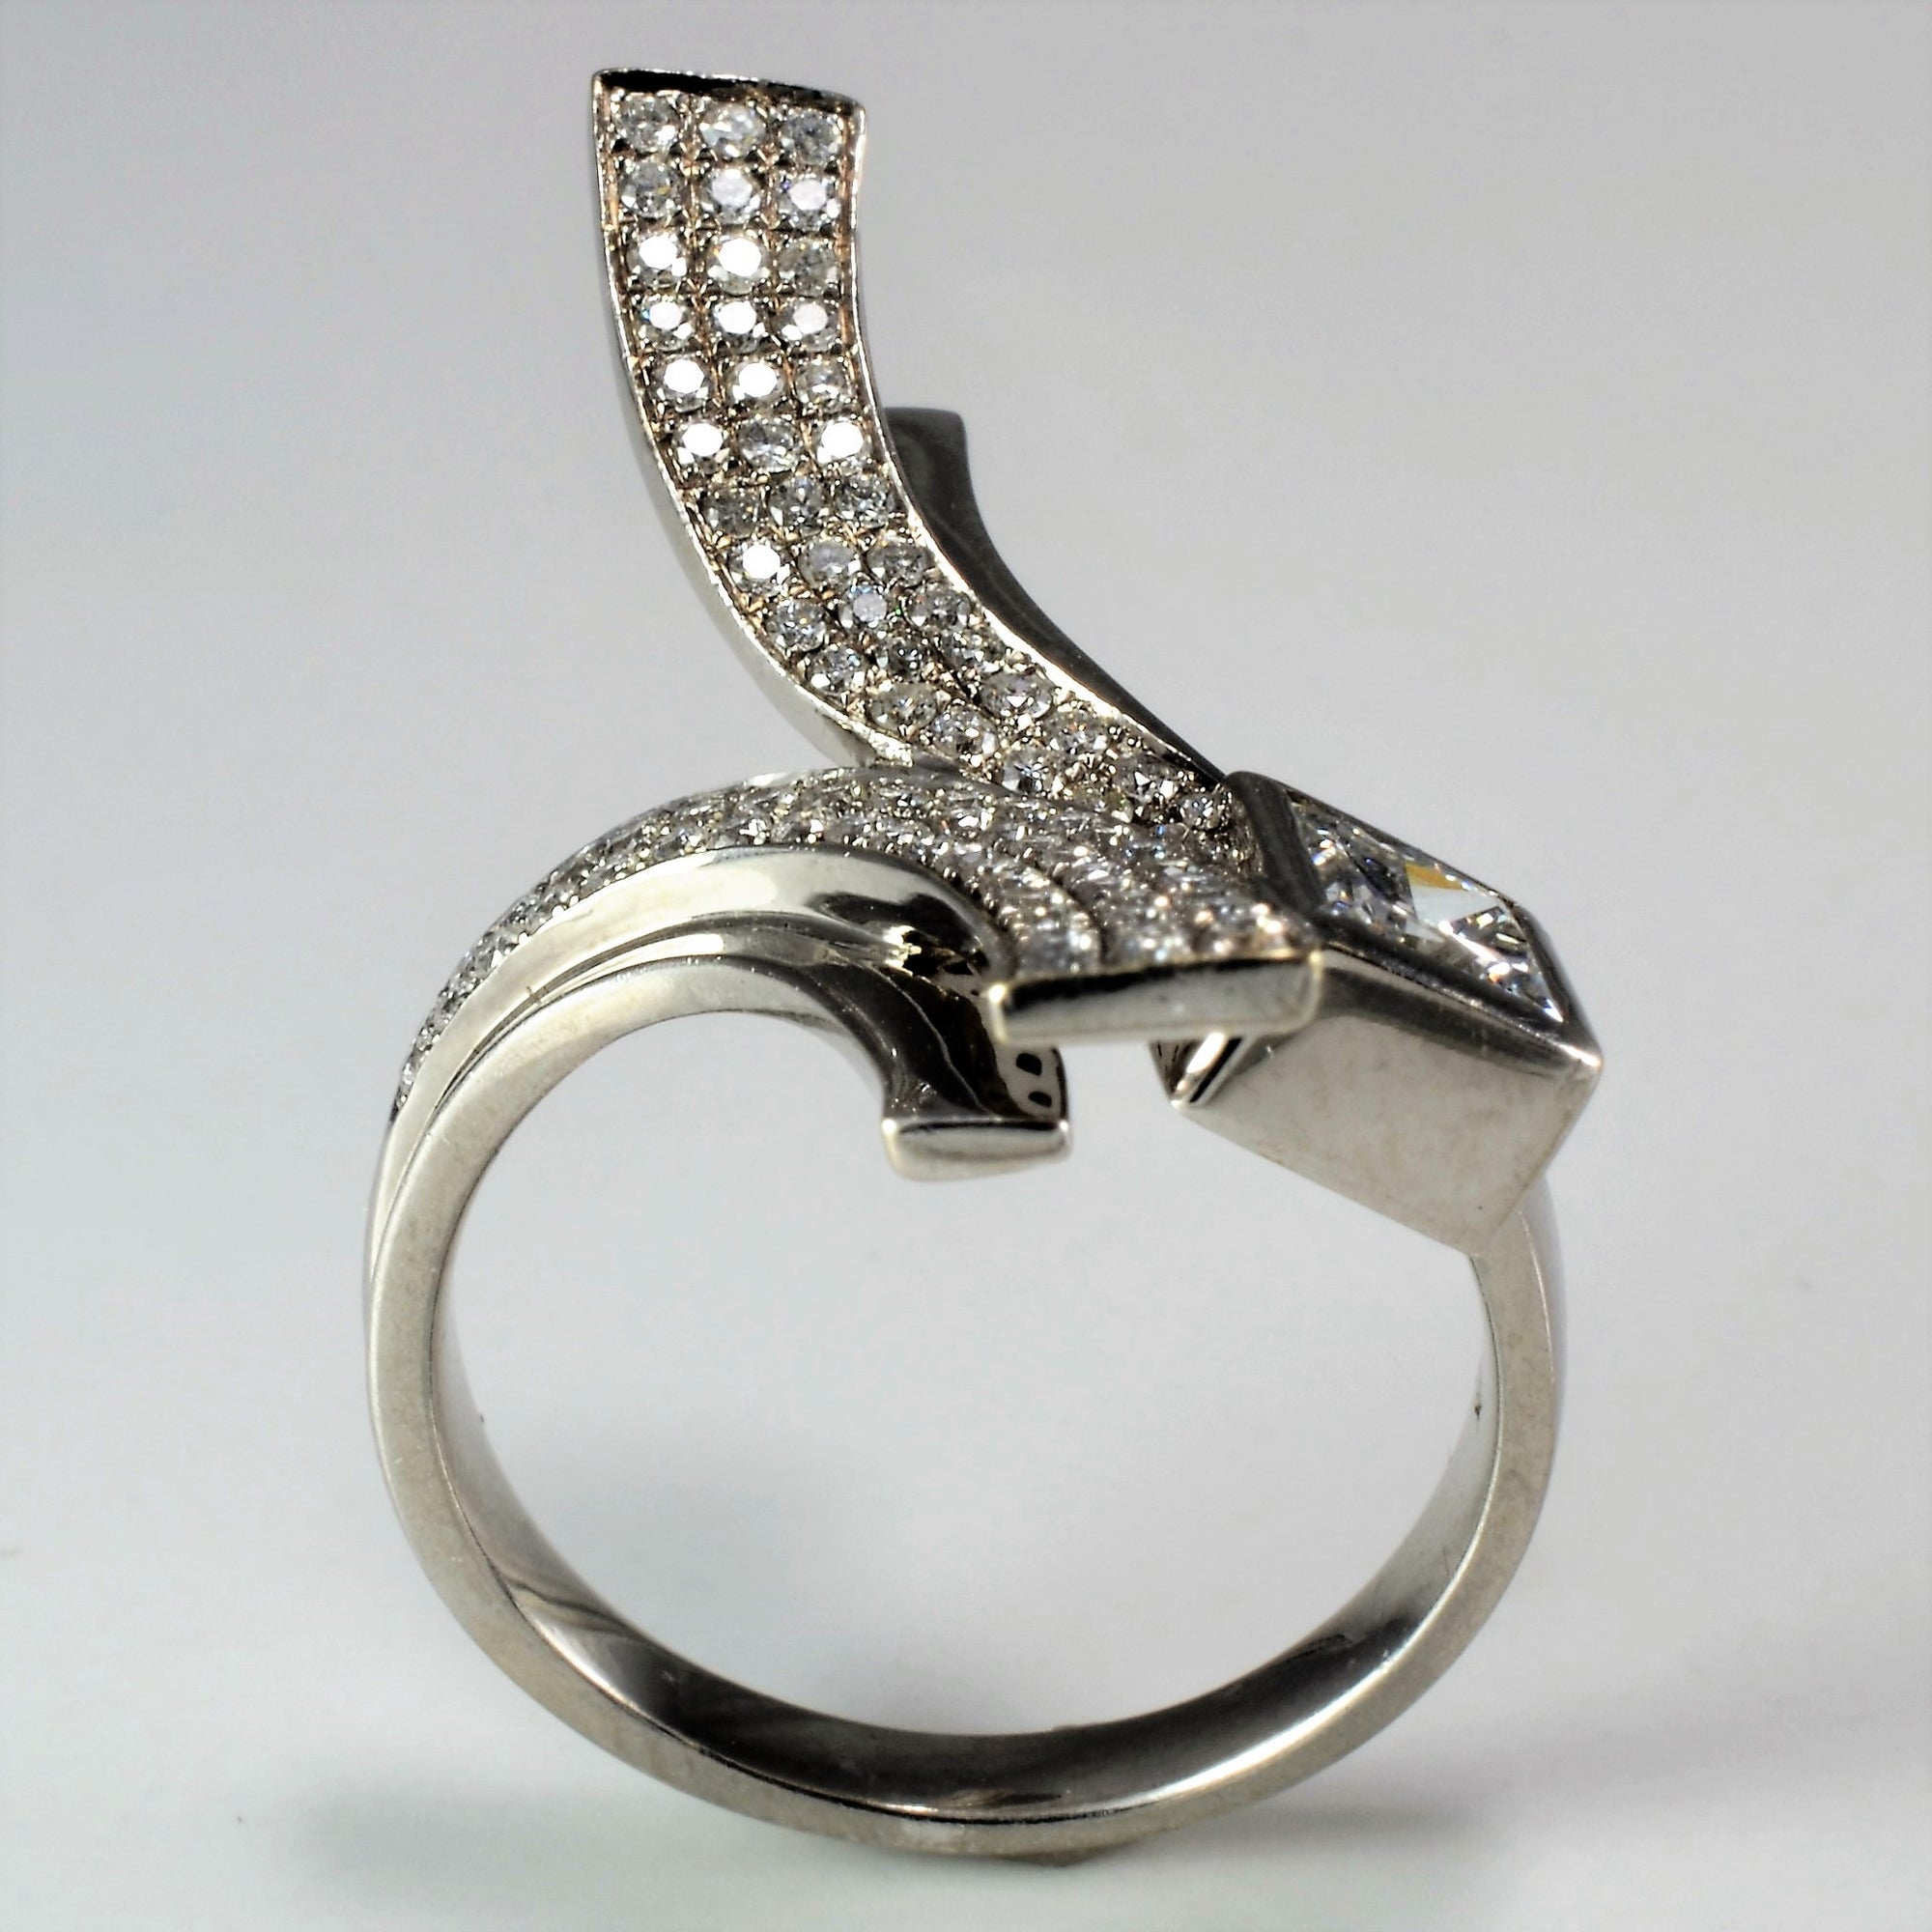 Princess Pave Bypass Cocktail Ring | 1.12ctw | SZ 7 |